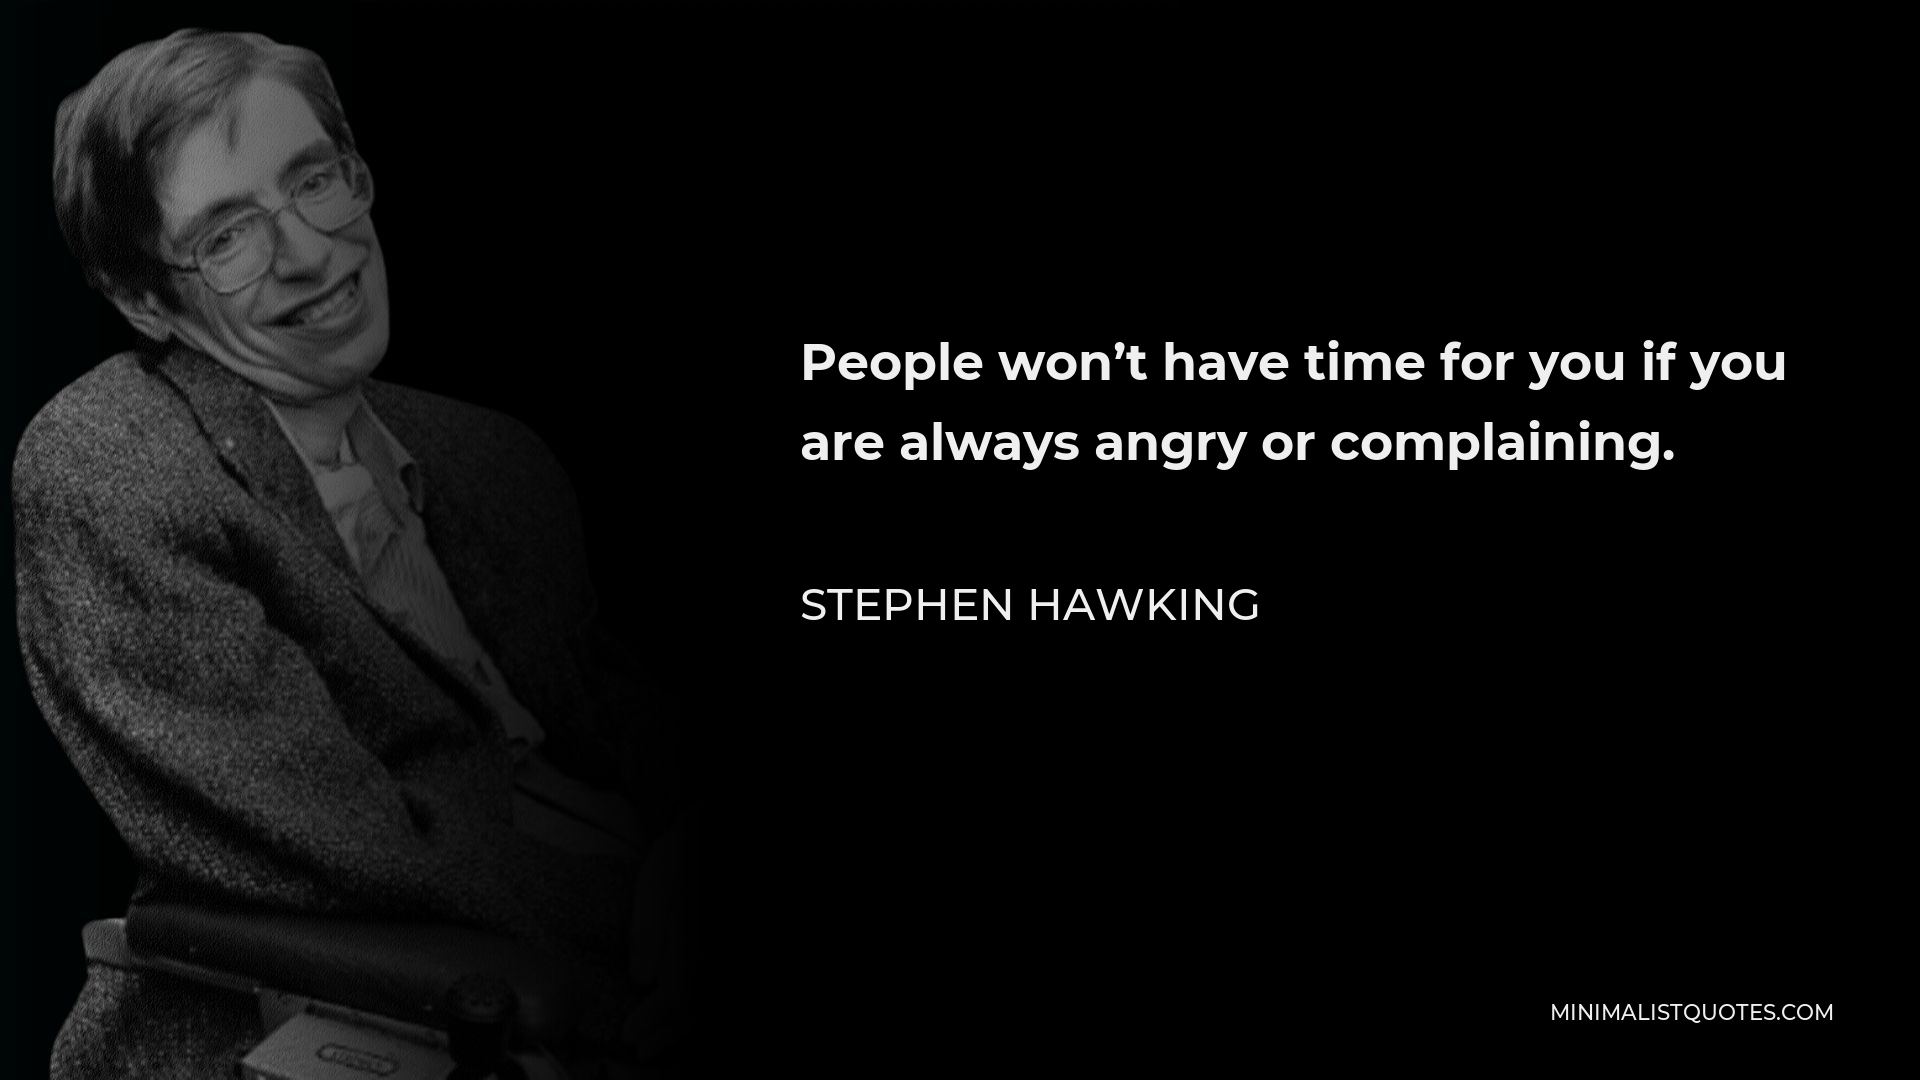 Stephen Hawking Quote - People won’t have time for you if you are always angry or complaining.